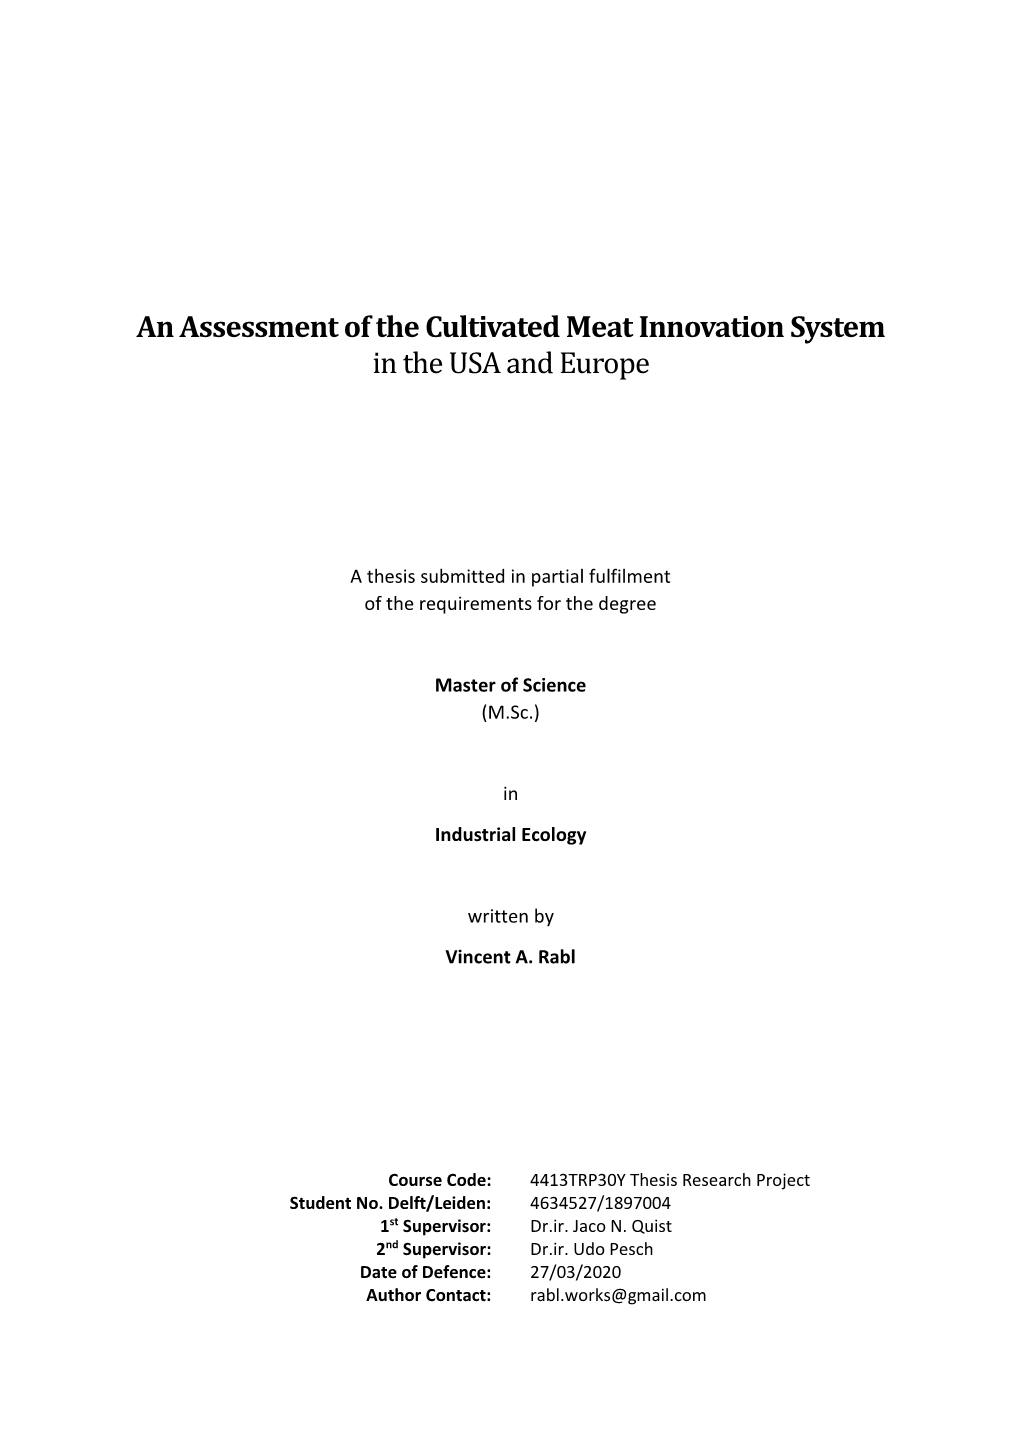 An Assessment of the Cultivated Meat Innovation System in the USA and Europe